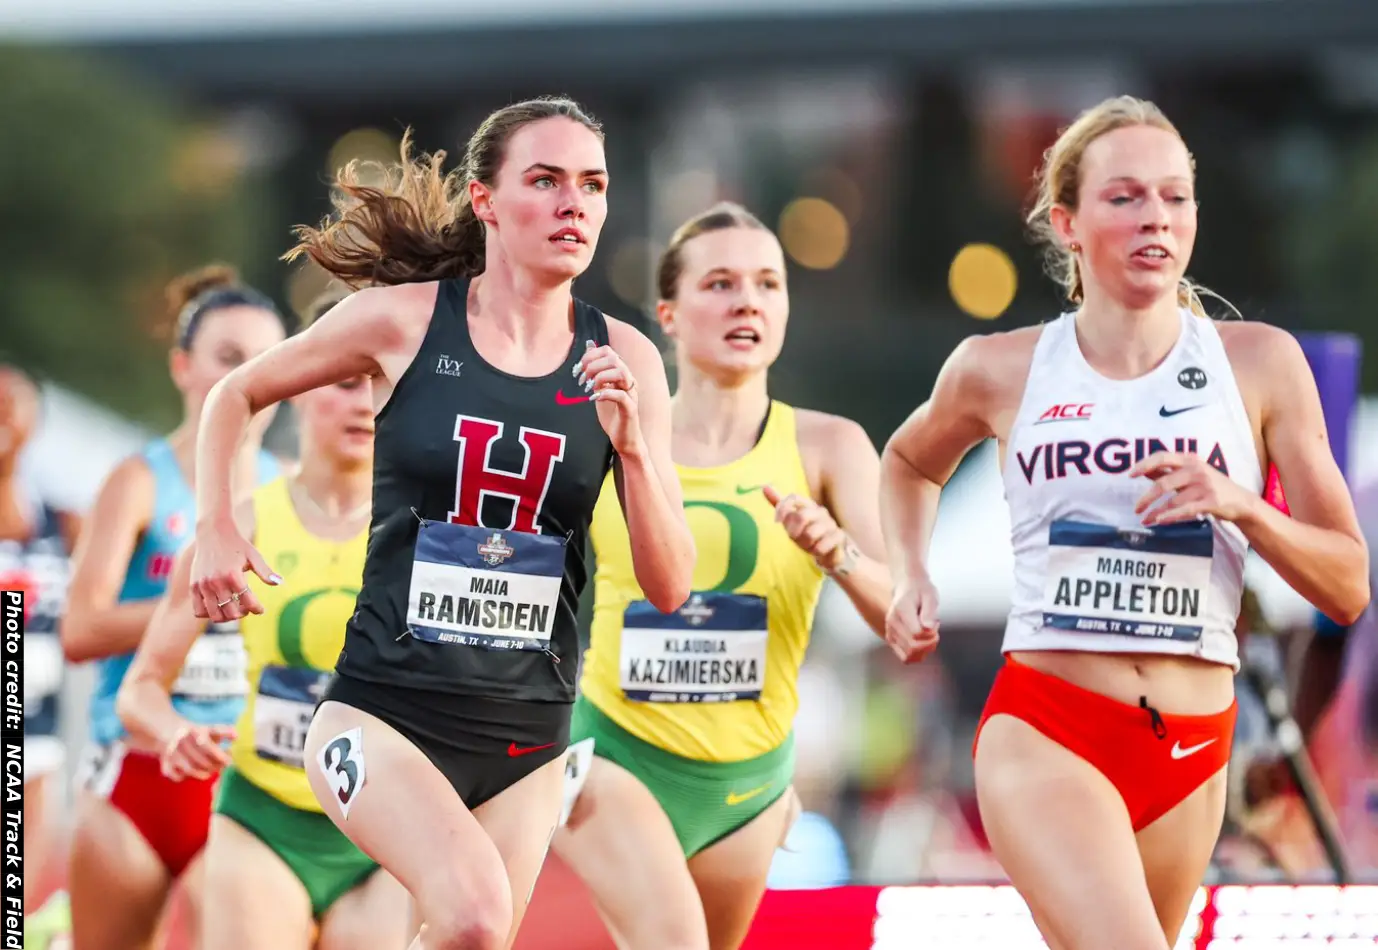 Maia Ramsden sets PB, wins 1500m at NCAA Championships; Tuohy fades to 7th